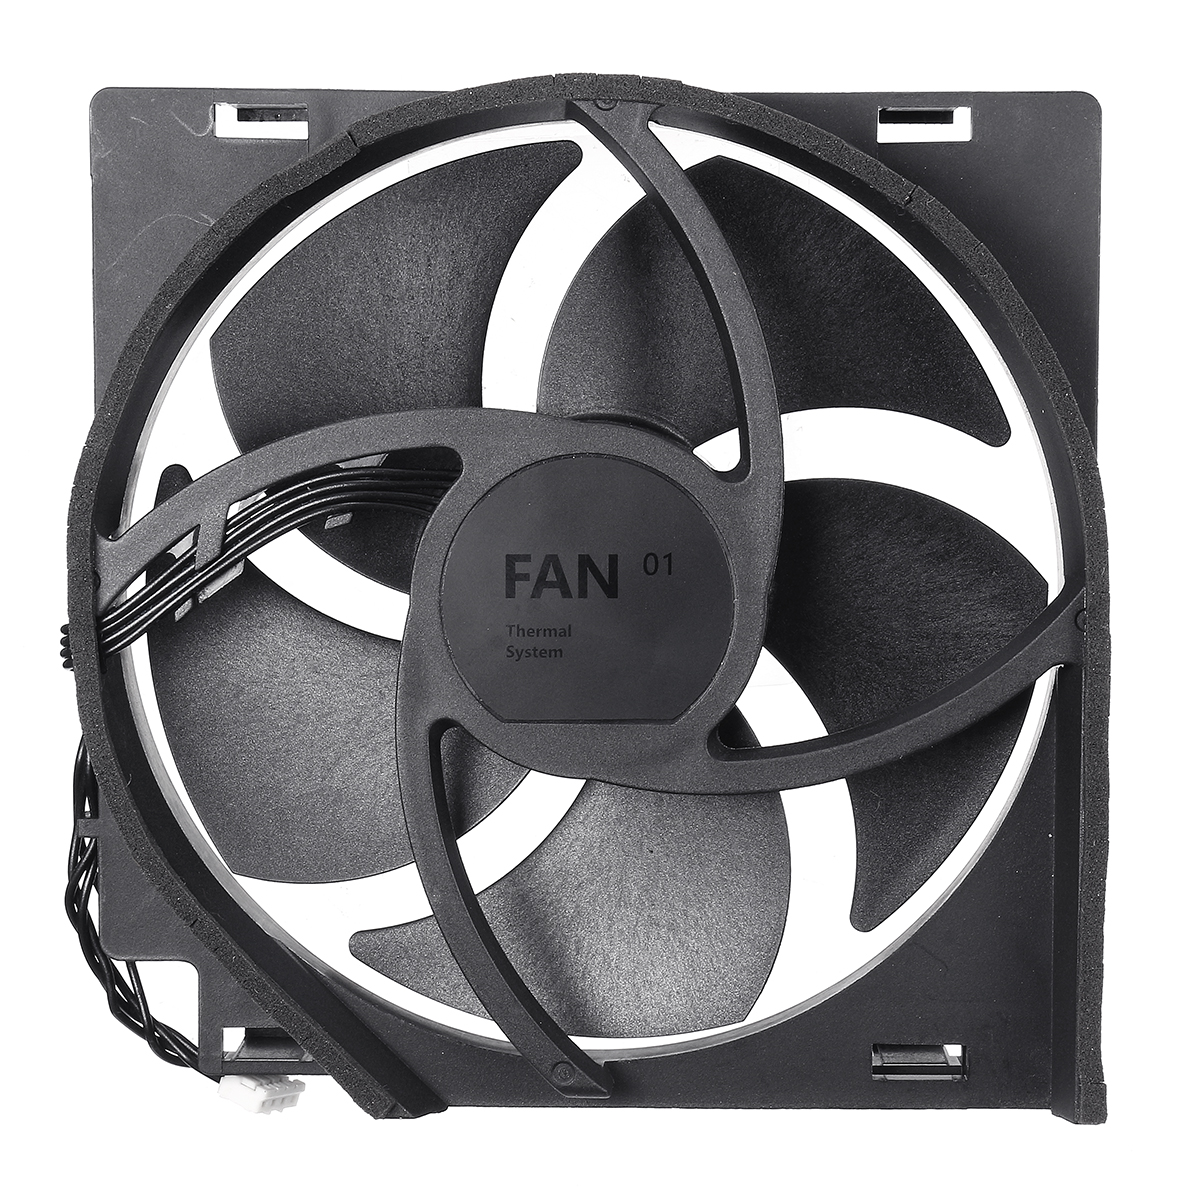 Replacement Internal Cooling Fan for Xbox One S Slim Game Console